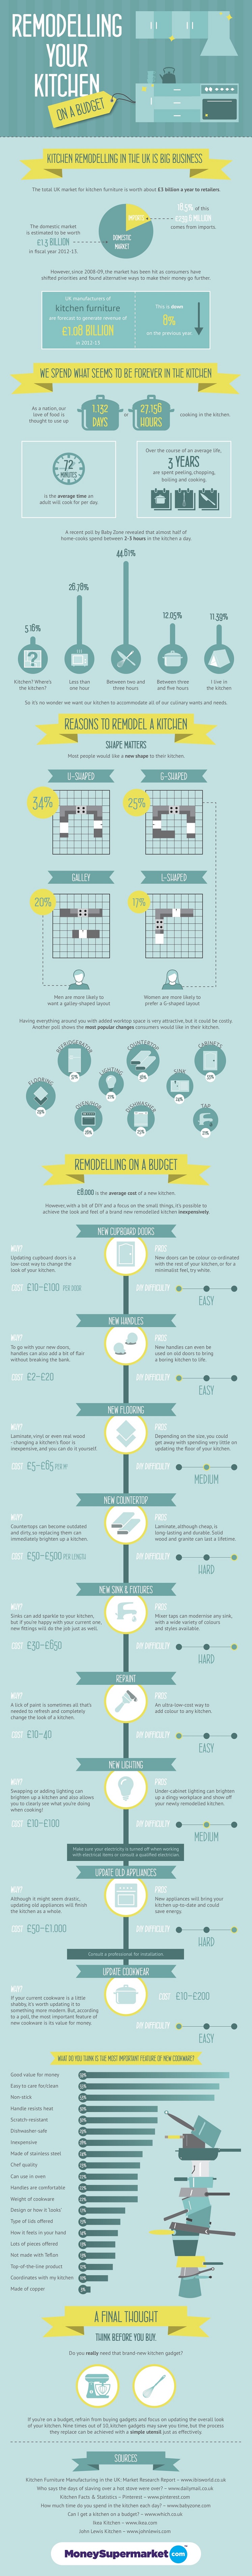 Remodeling your kitchen on a budget Infographic